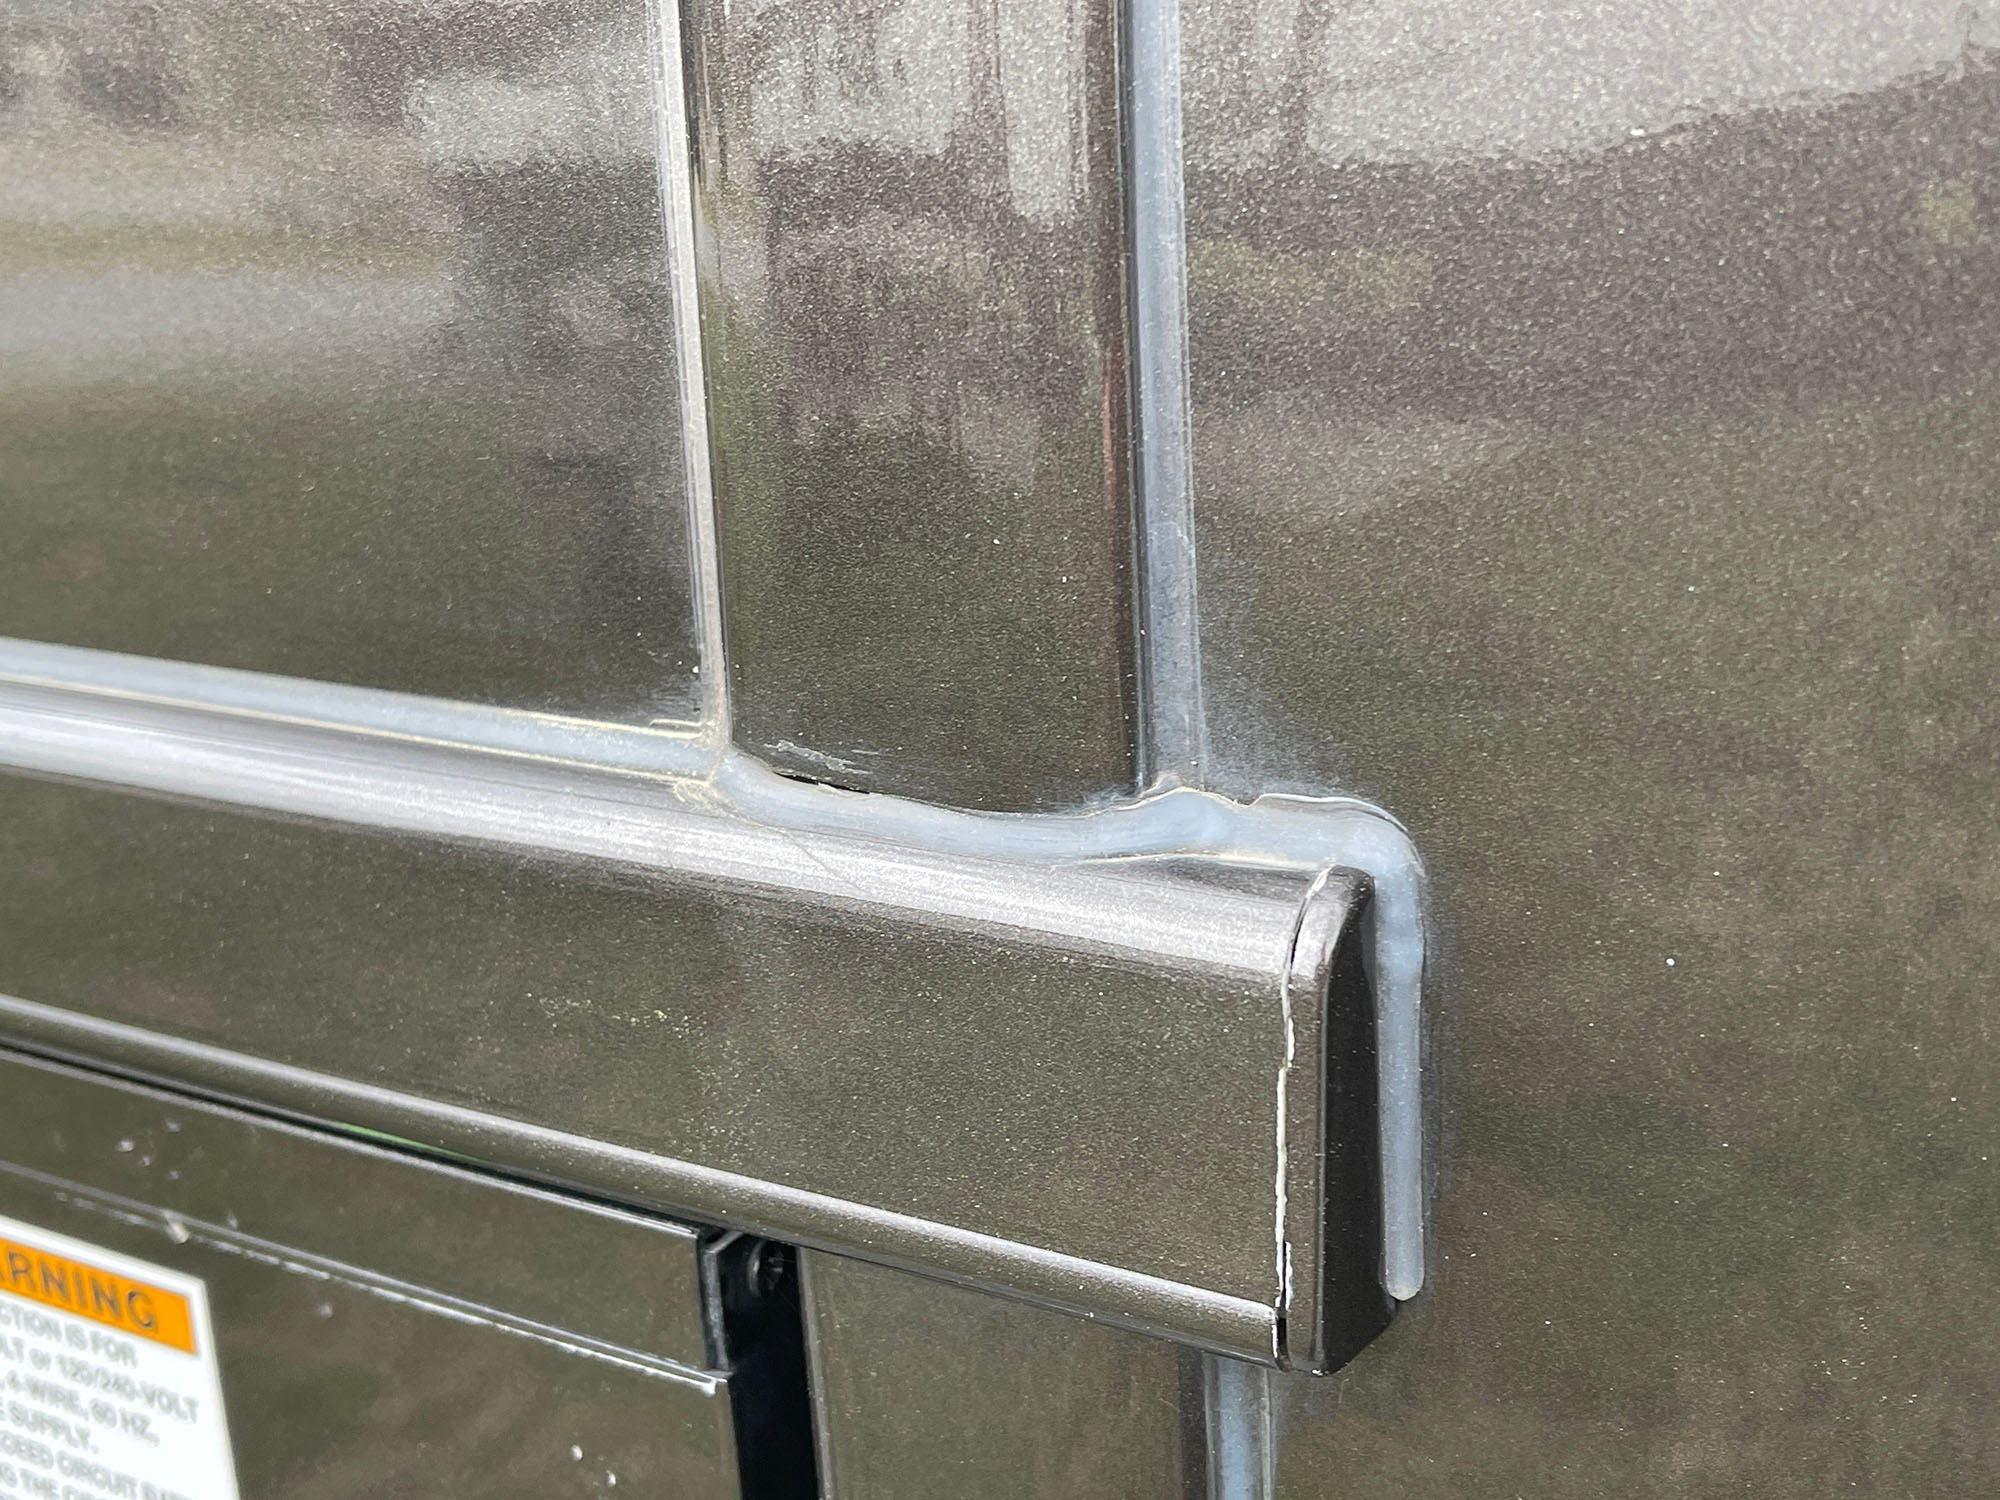 a close up view of caulk on the side of a motorhome